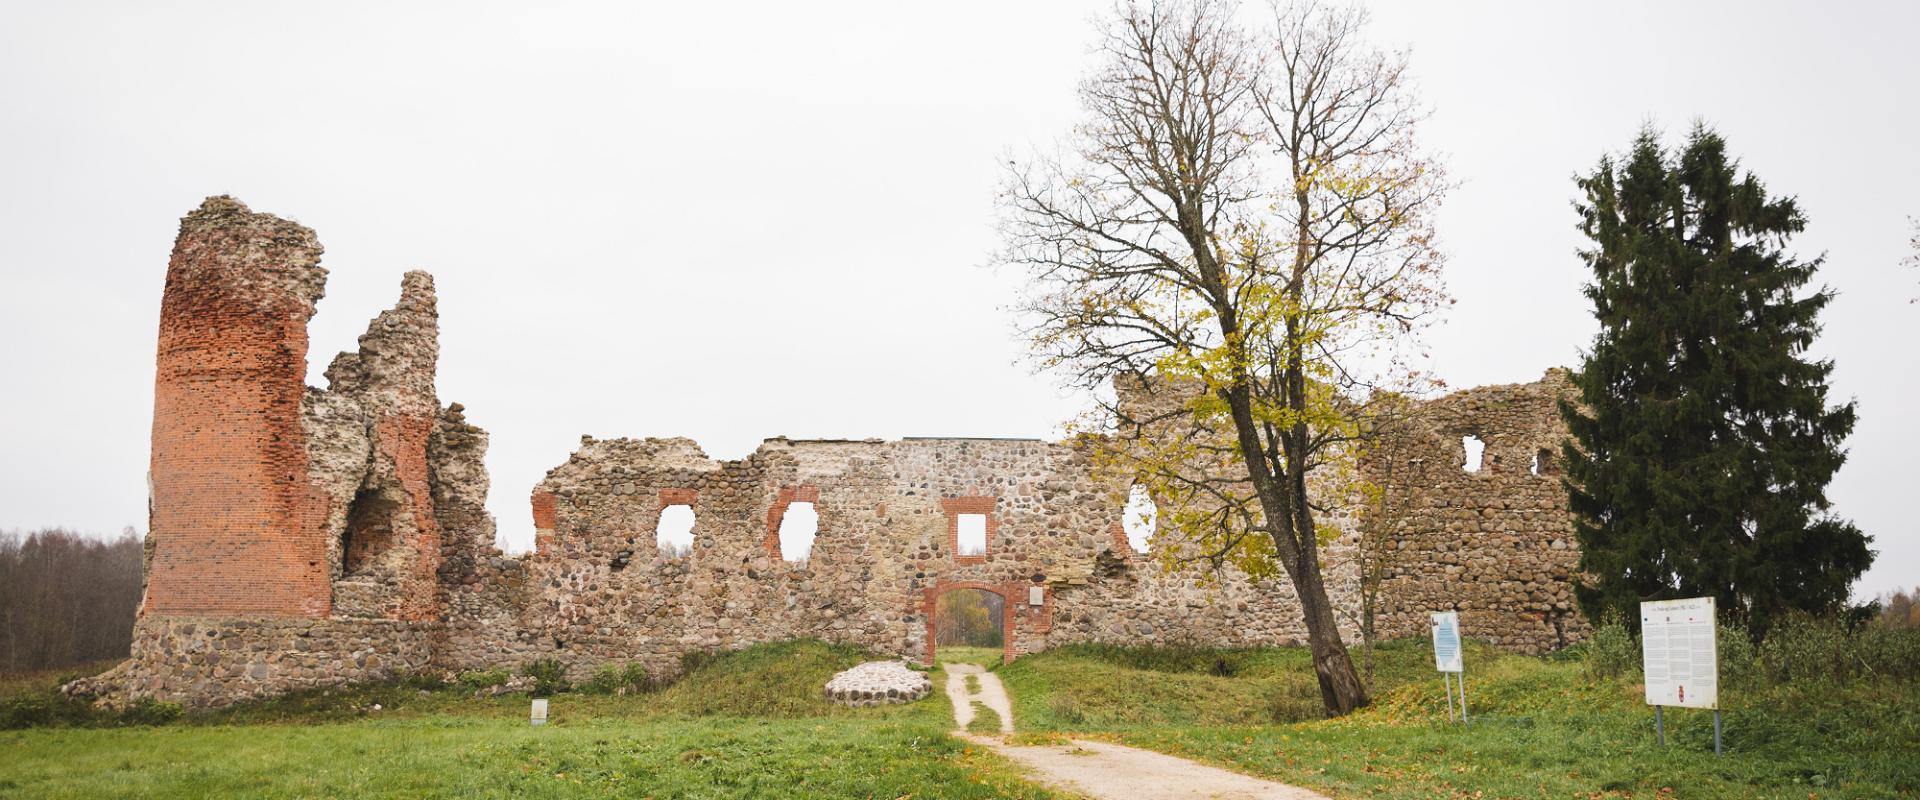 Laiuse fortress ruins